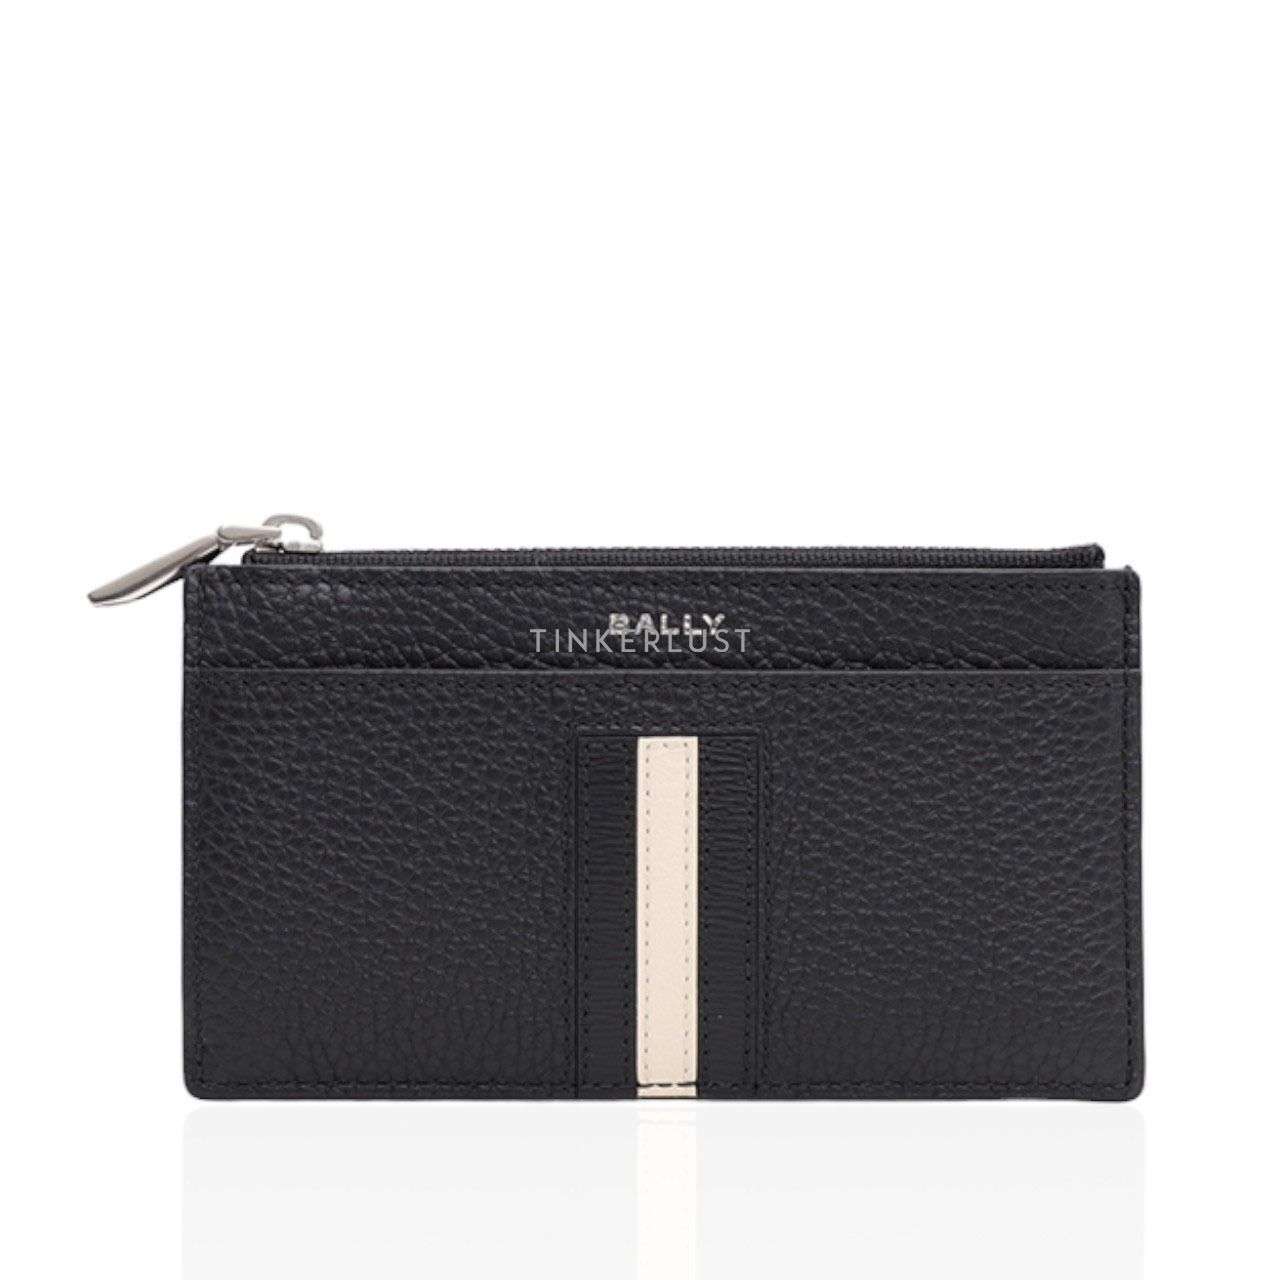 Bally Ribbon Business Card Holder in Black Grained Leather Wallet